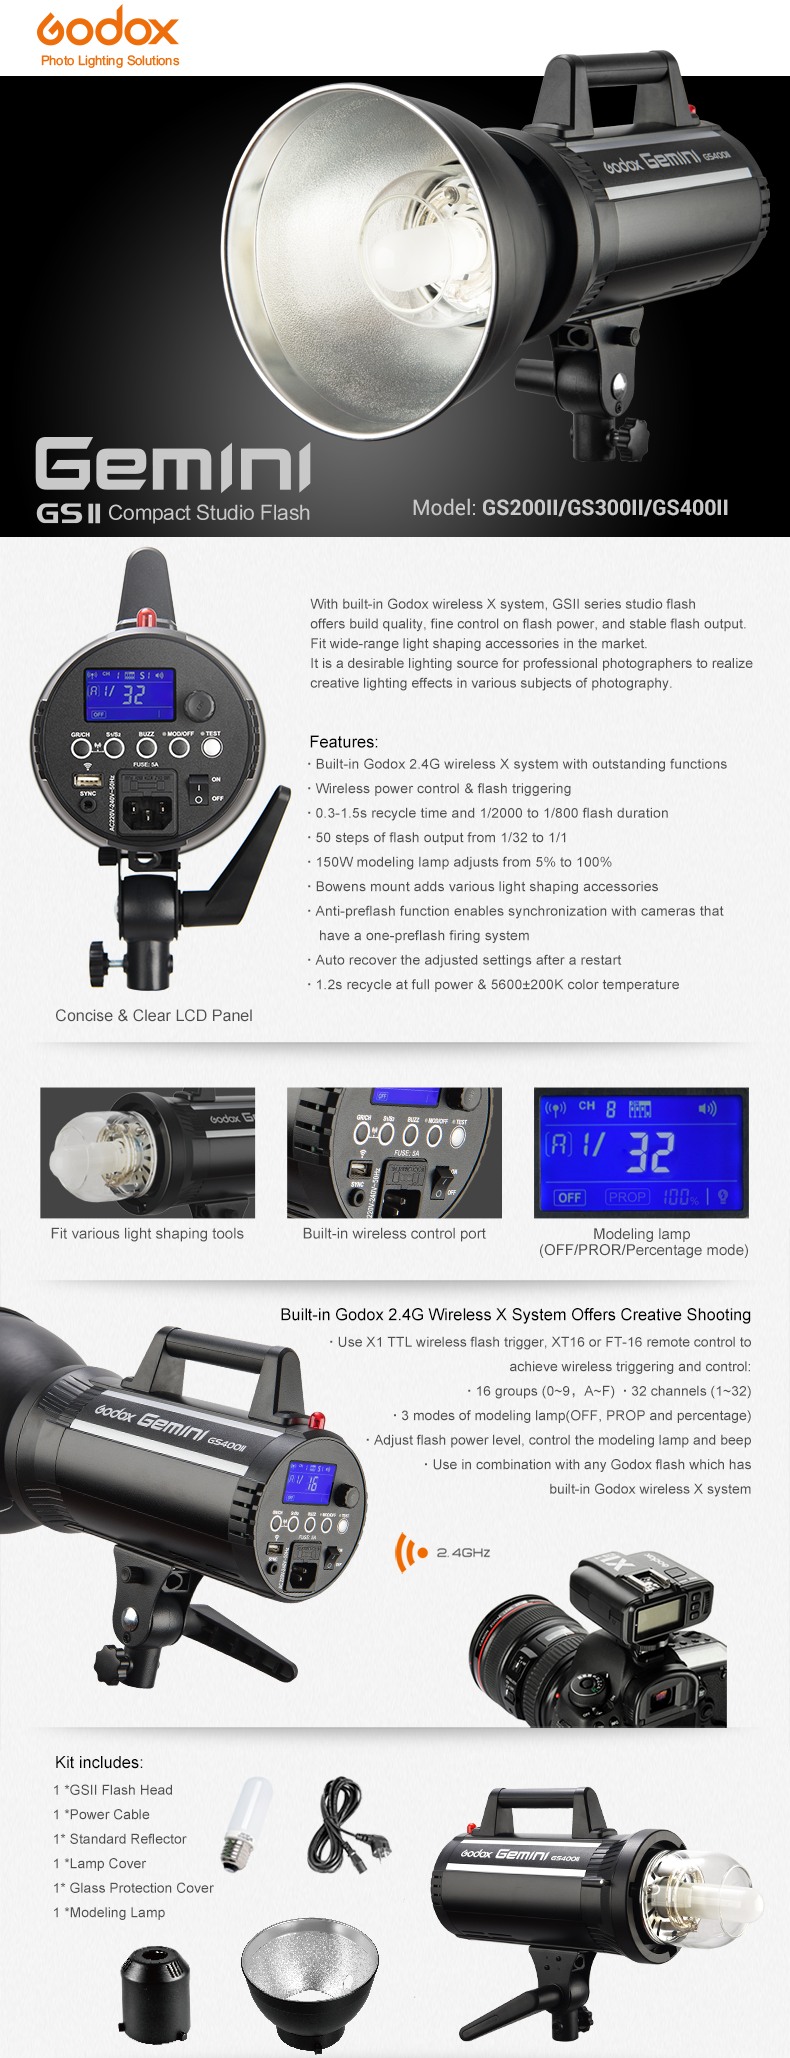 Godox Studio Light Gemini GSII Compact Studio Flash Kit Technical data and features. Built-in Godox 2.4G wireless X system. Clear LCD panel.